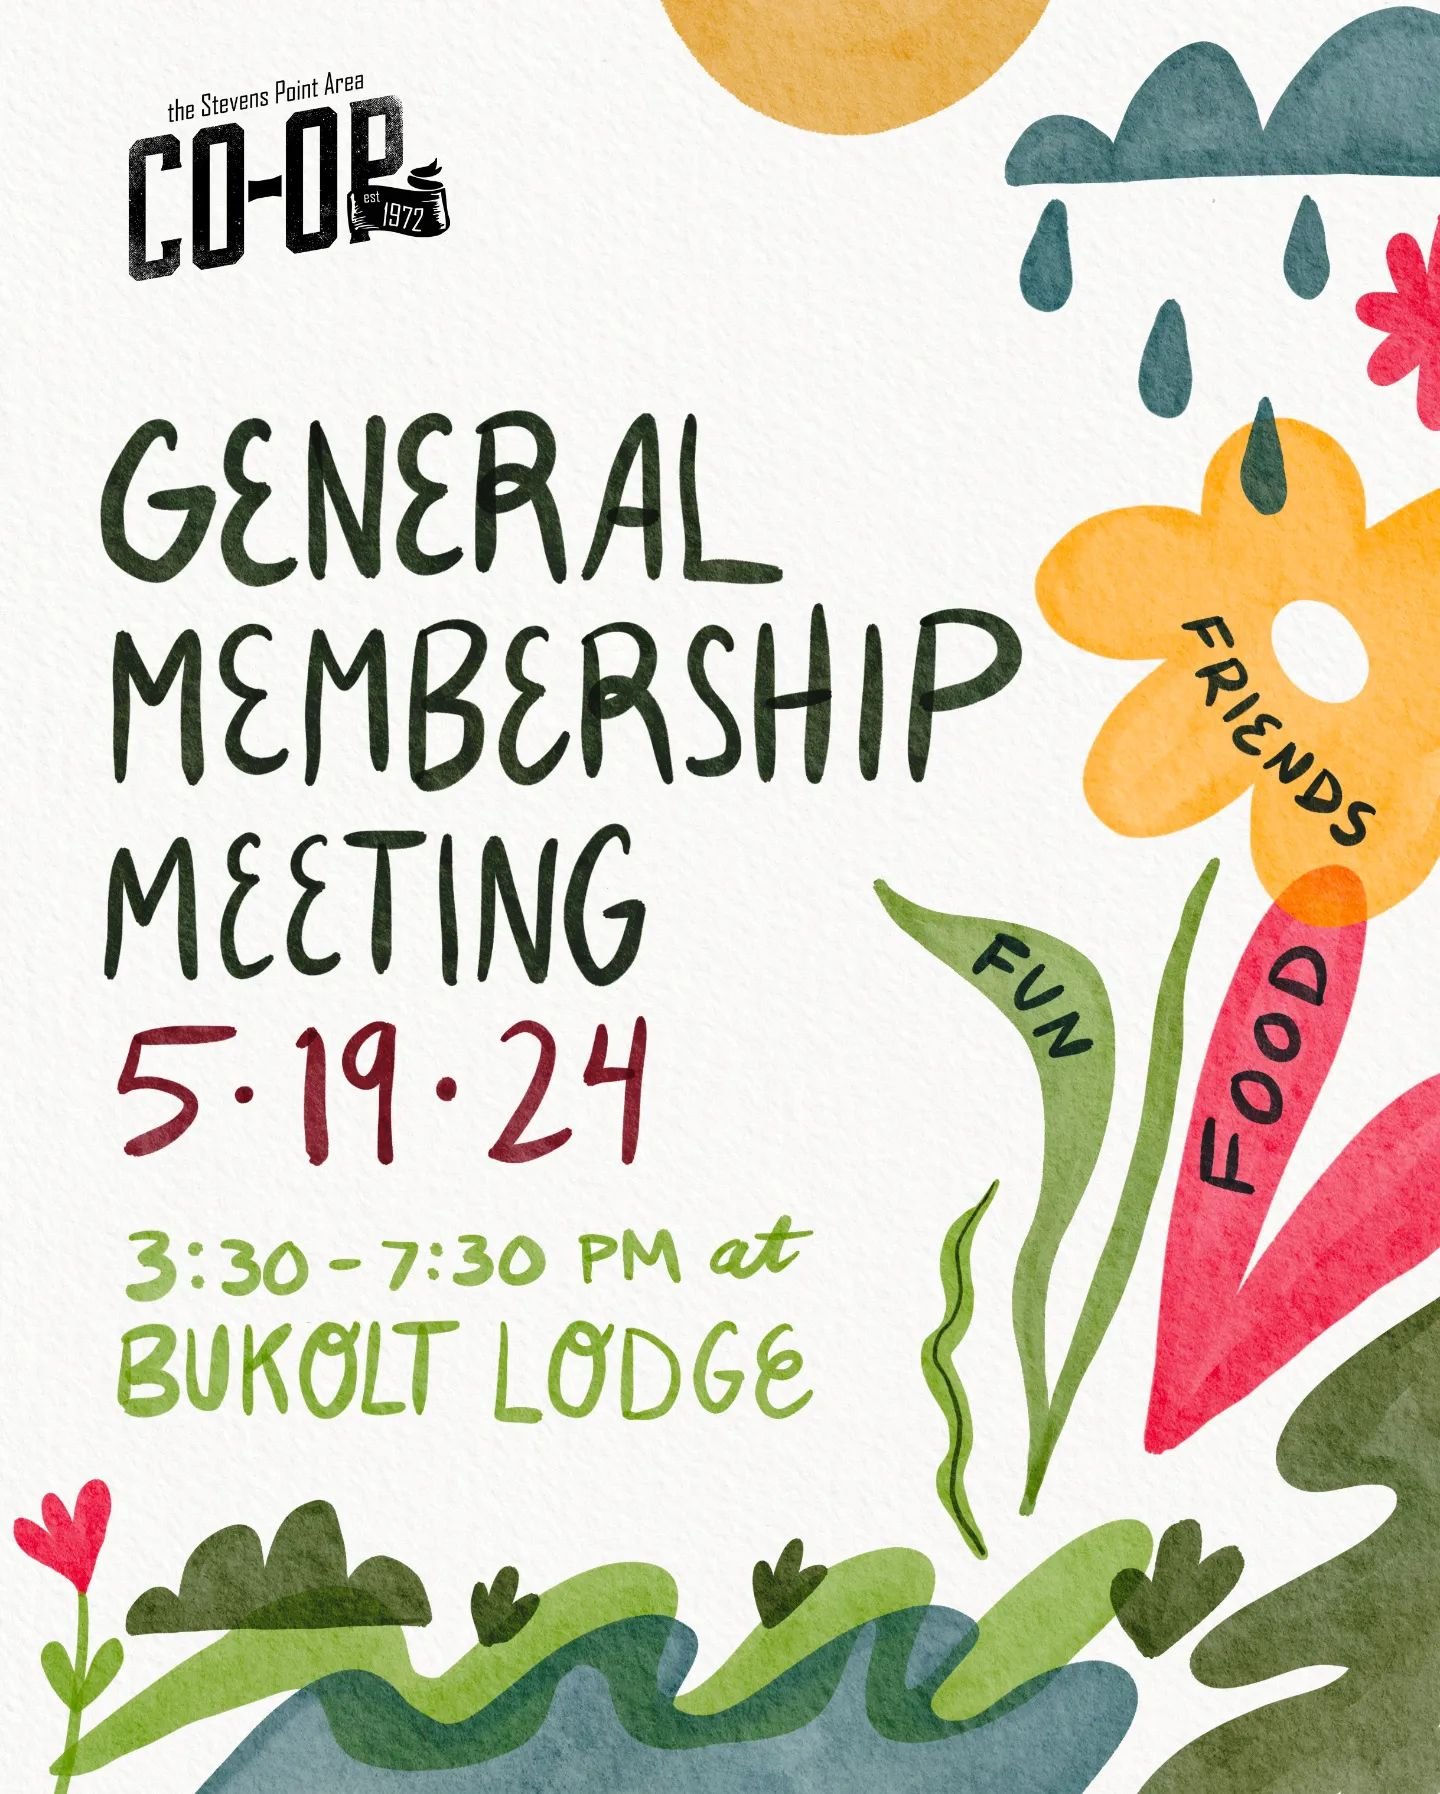 We are looking forward to seeing you at our GMM next month at Bukolt Lodge! This is where Co-op members get together to celebrate our community as well as discuss some important Co-op topics. We're excited to share more about this event as it gets cl